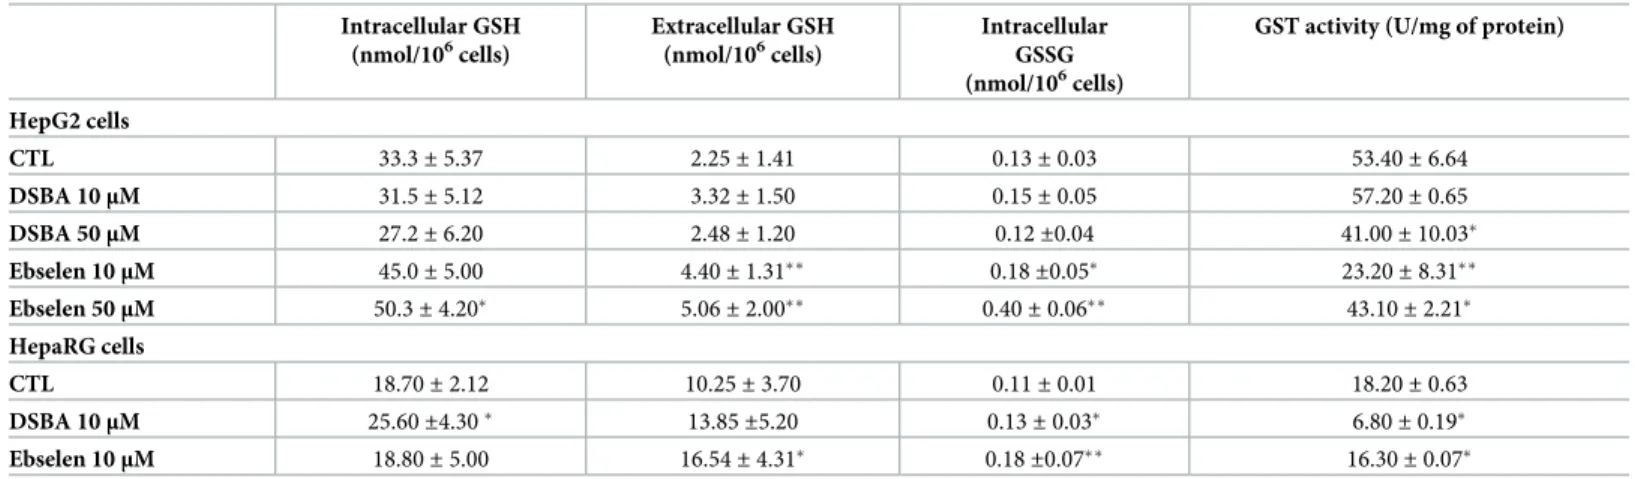 Table 1. Cellular and extracellular levels of glutathione in tumoral HepG2 and non-tumoral HepaRG human liver cell lines treated for 24 hours with DSBA